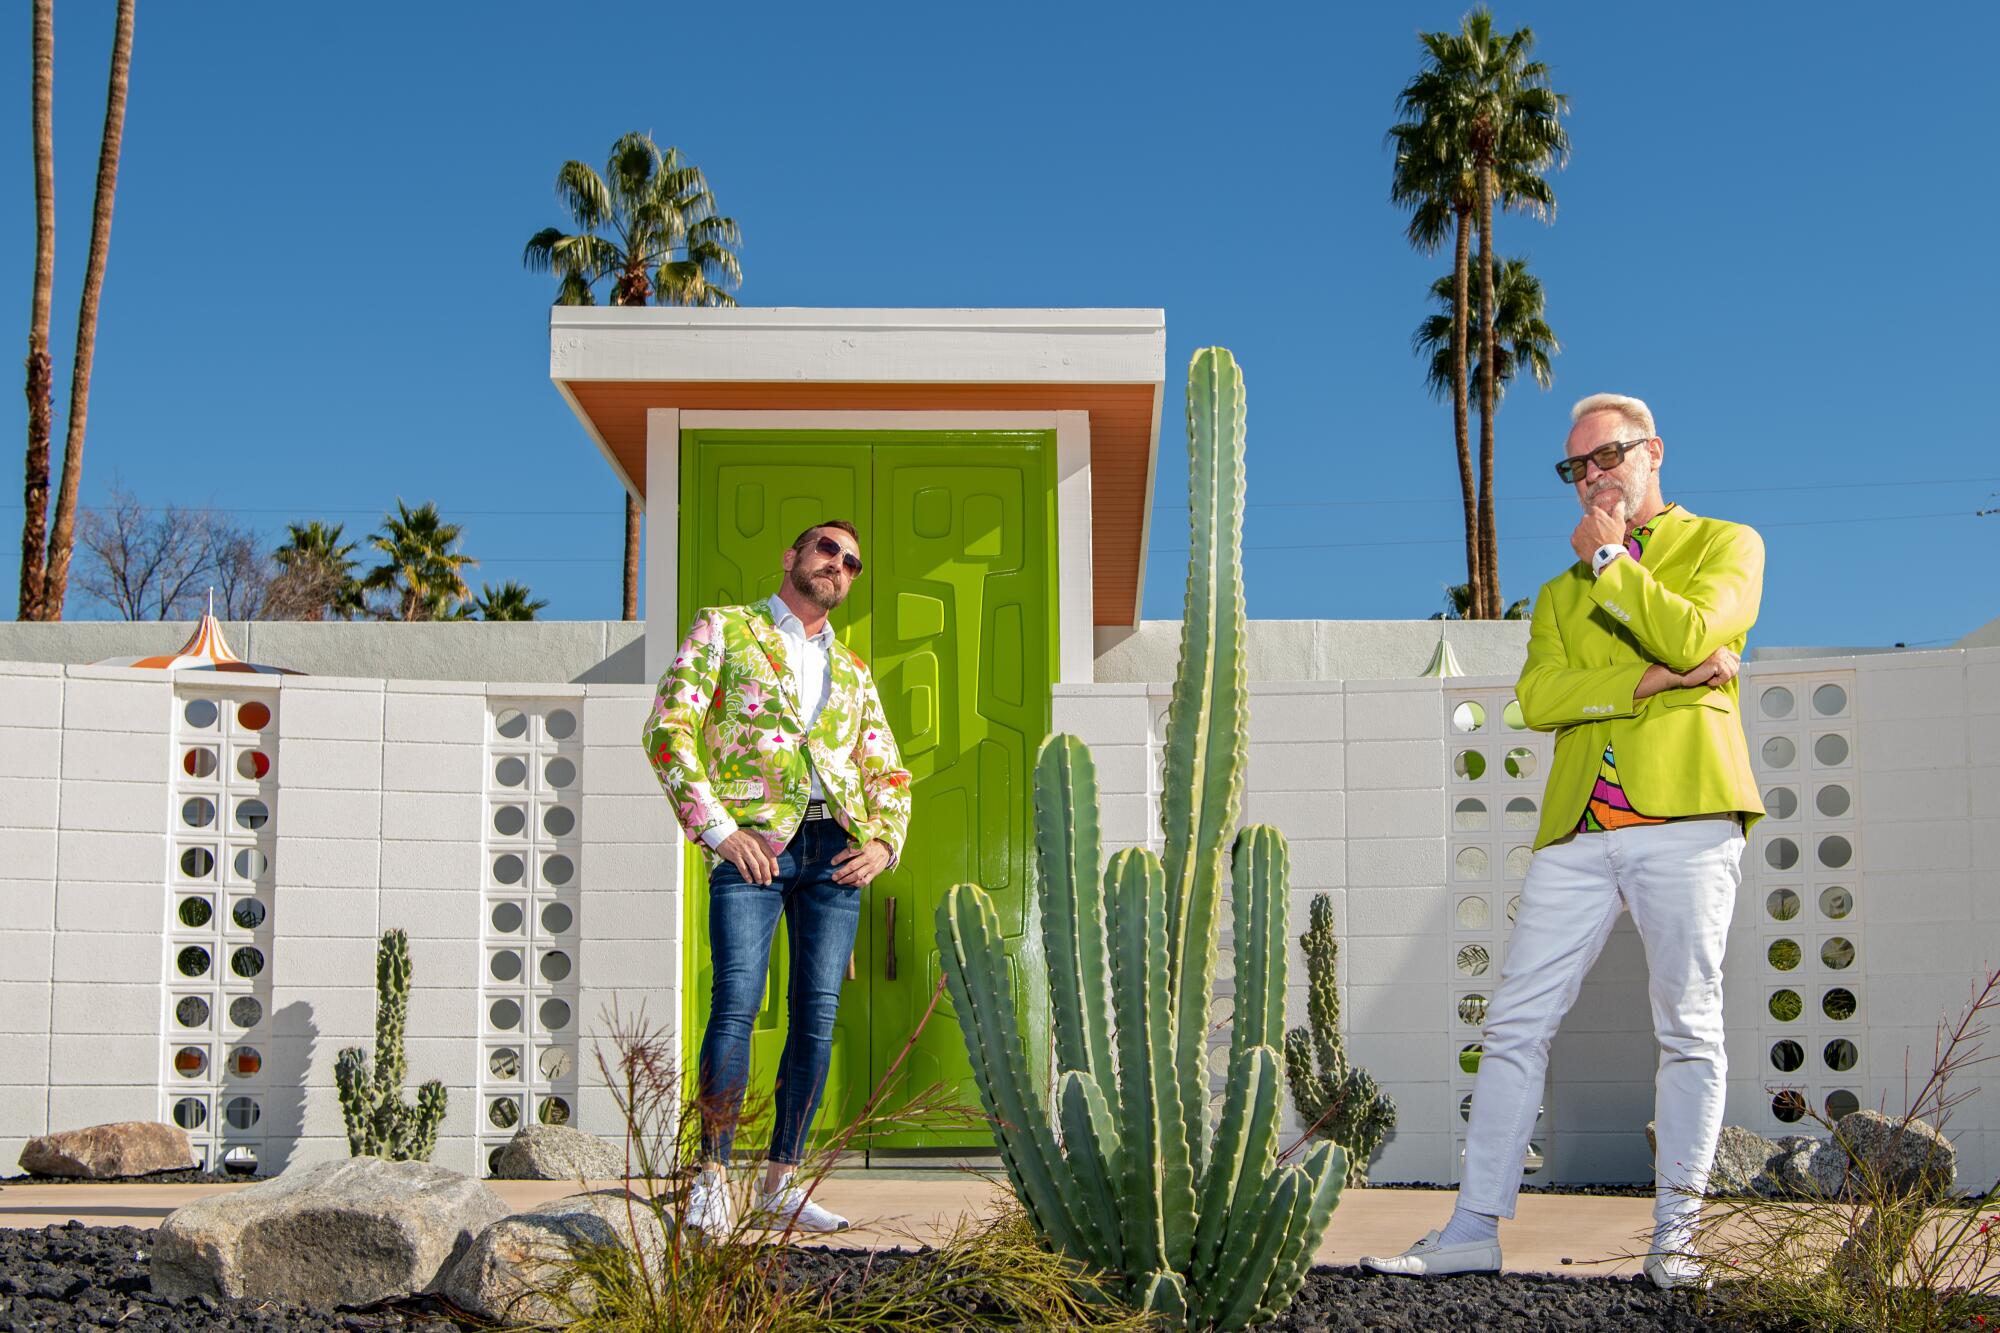 Brandon McBurney and Josh Agle outside a Midcentury Modern home with a lime green door